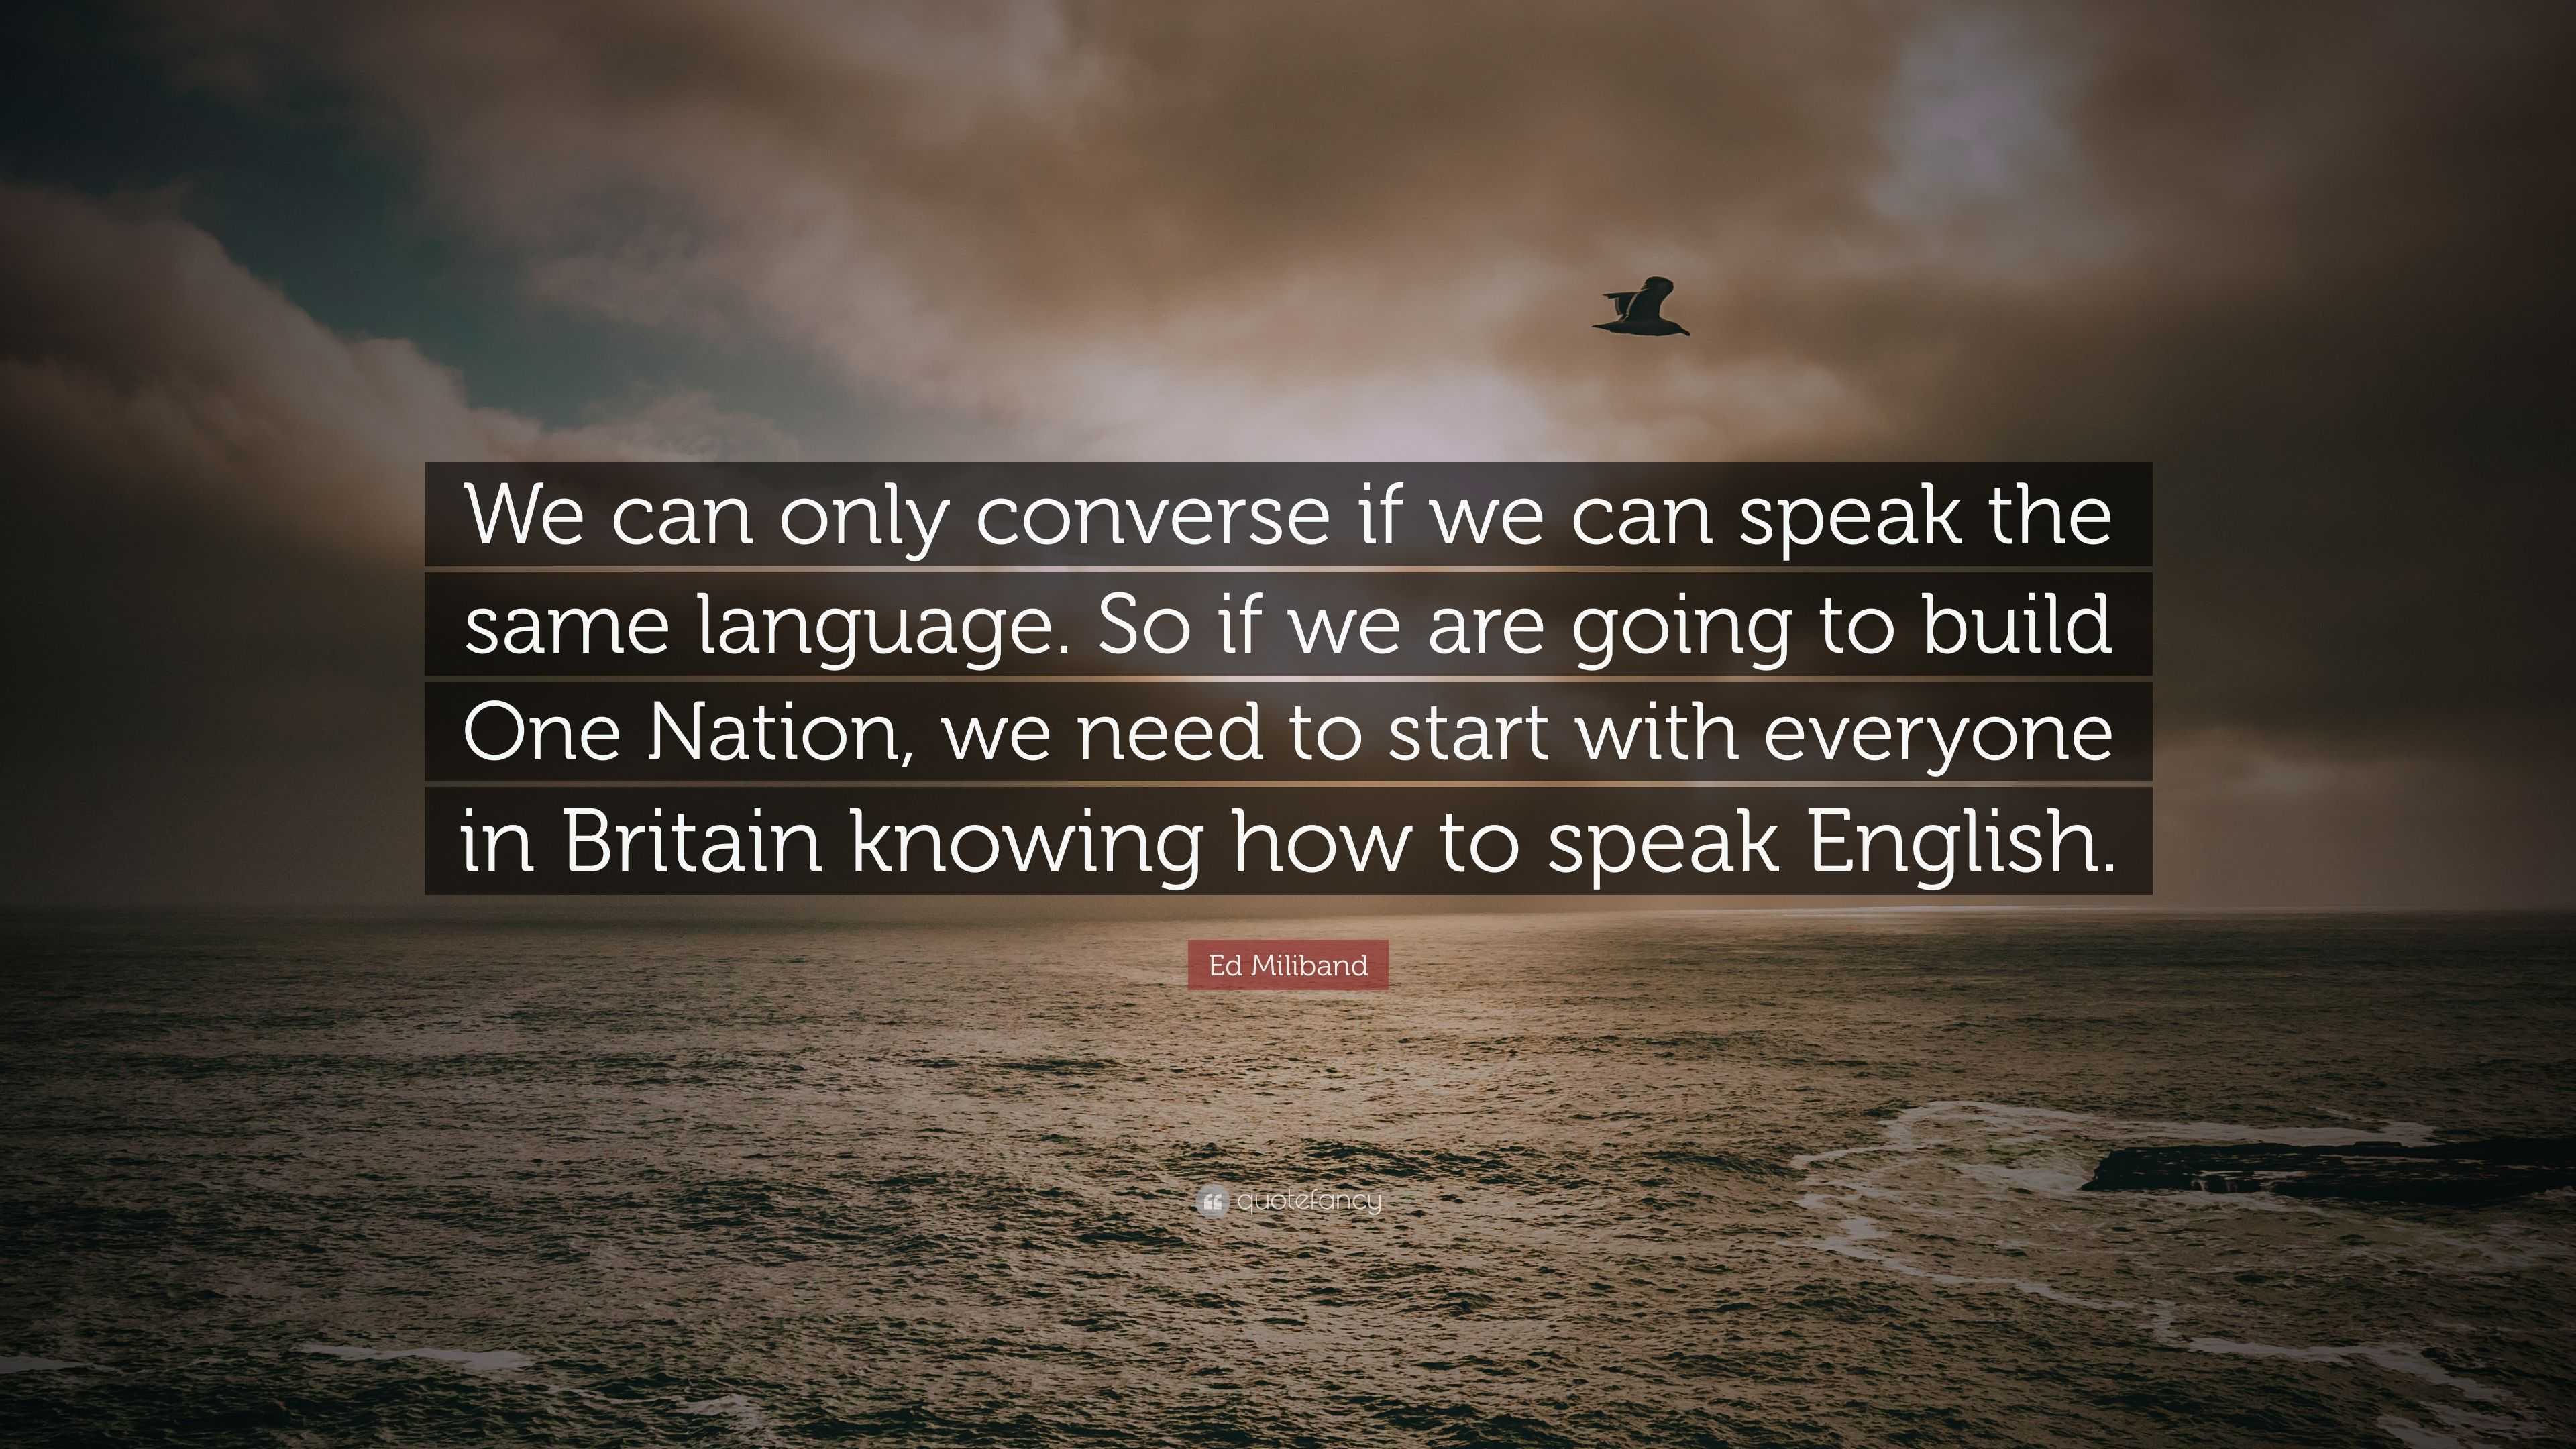 Ed Miliband Quote: “We can only converse if we can speak the same language.  So if we are going to build One Nation, we need to start with ev” (7  wallpapers) - Quotefancy